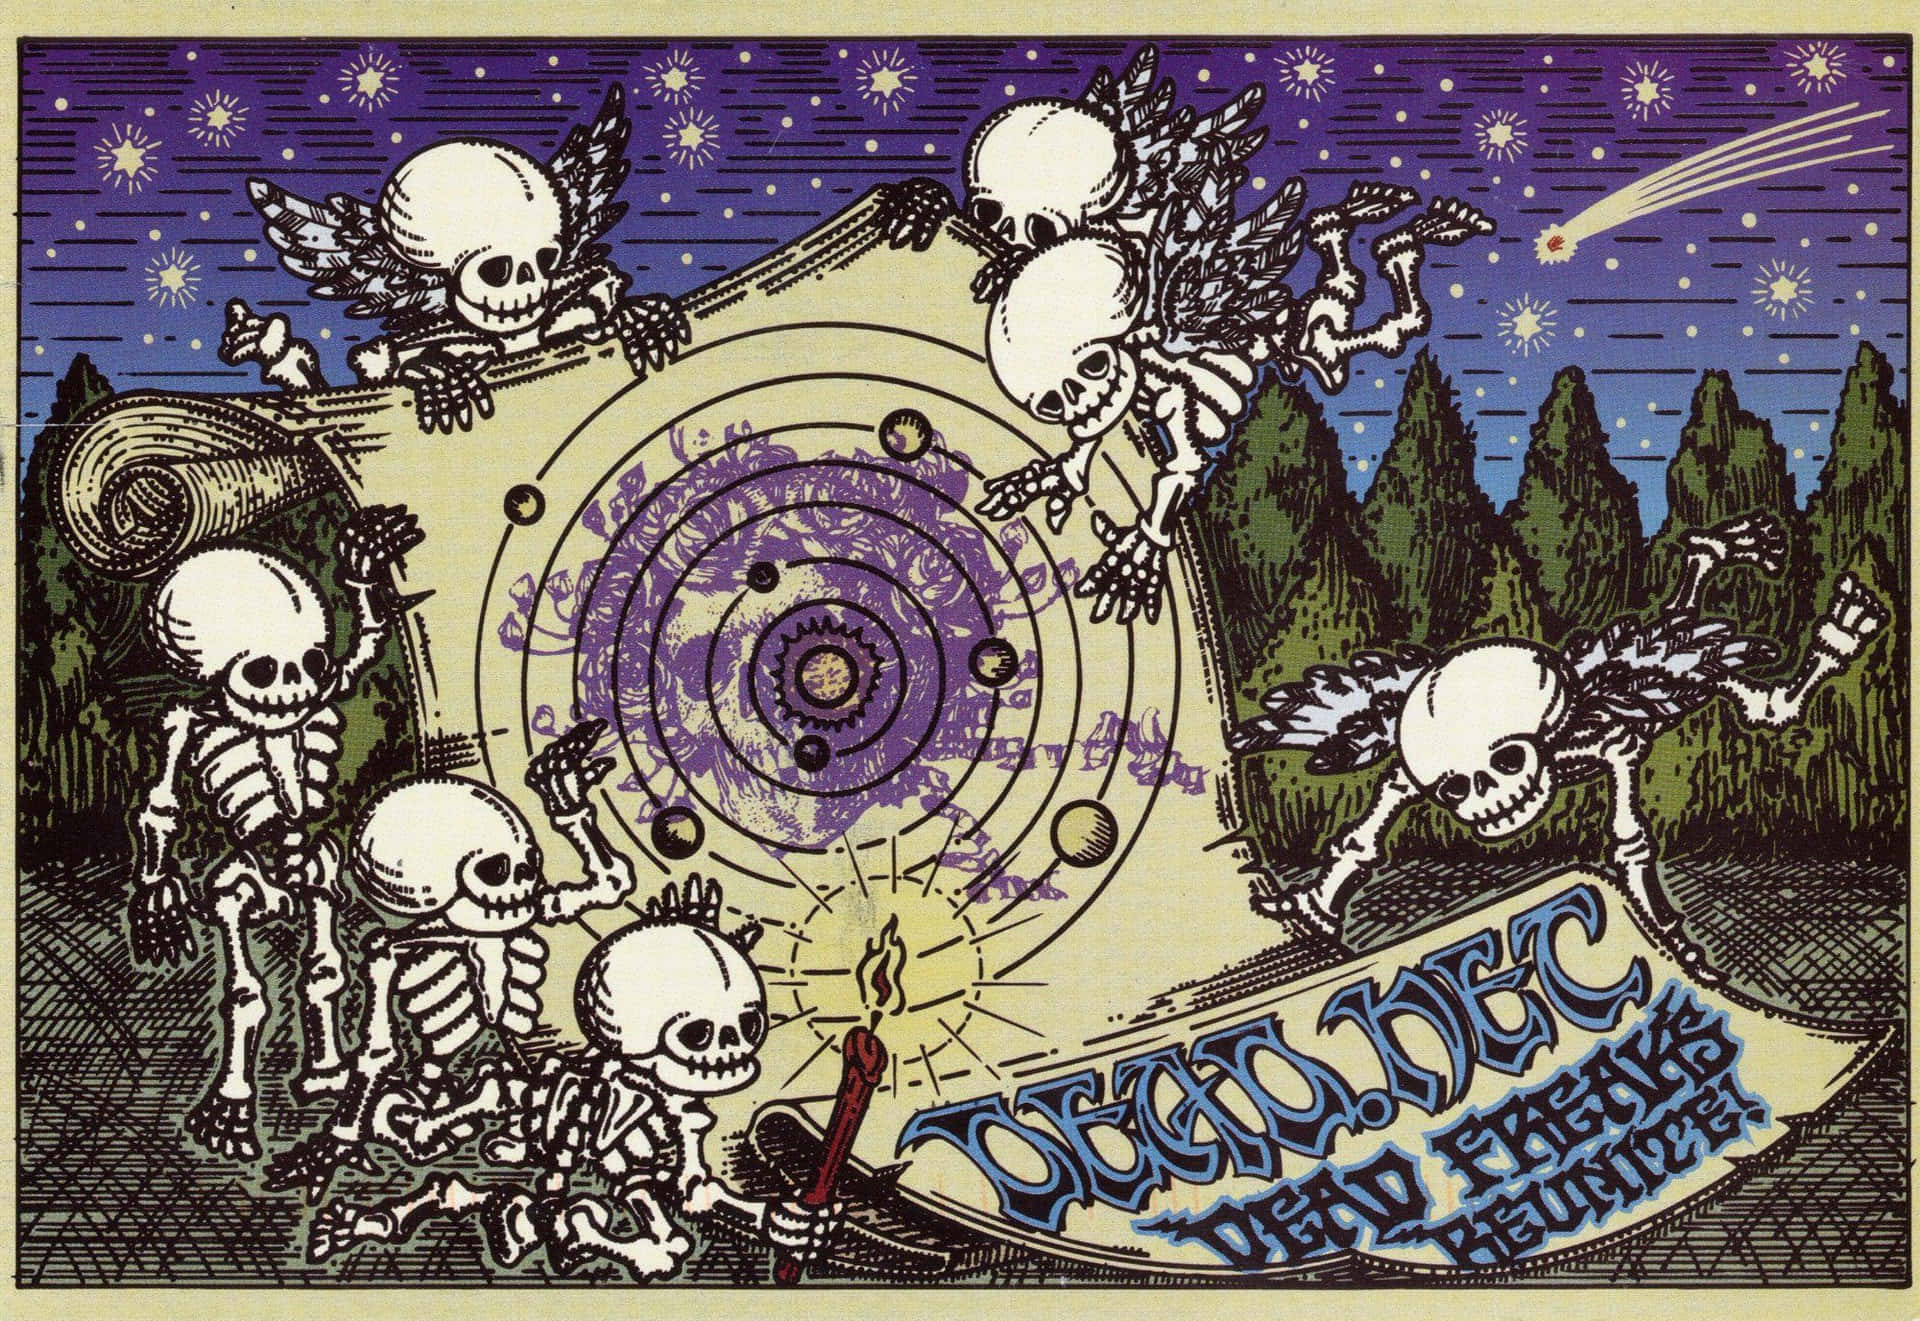 Experience your favorite music anywhere with the Grateful Dead Iphone Wallpaper